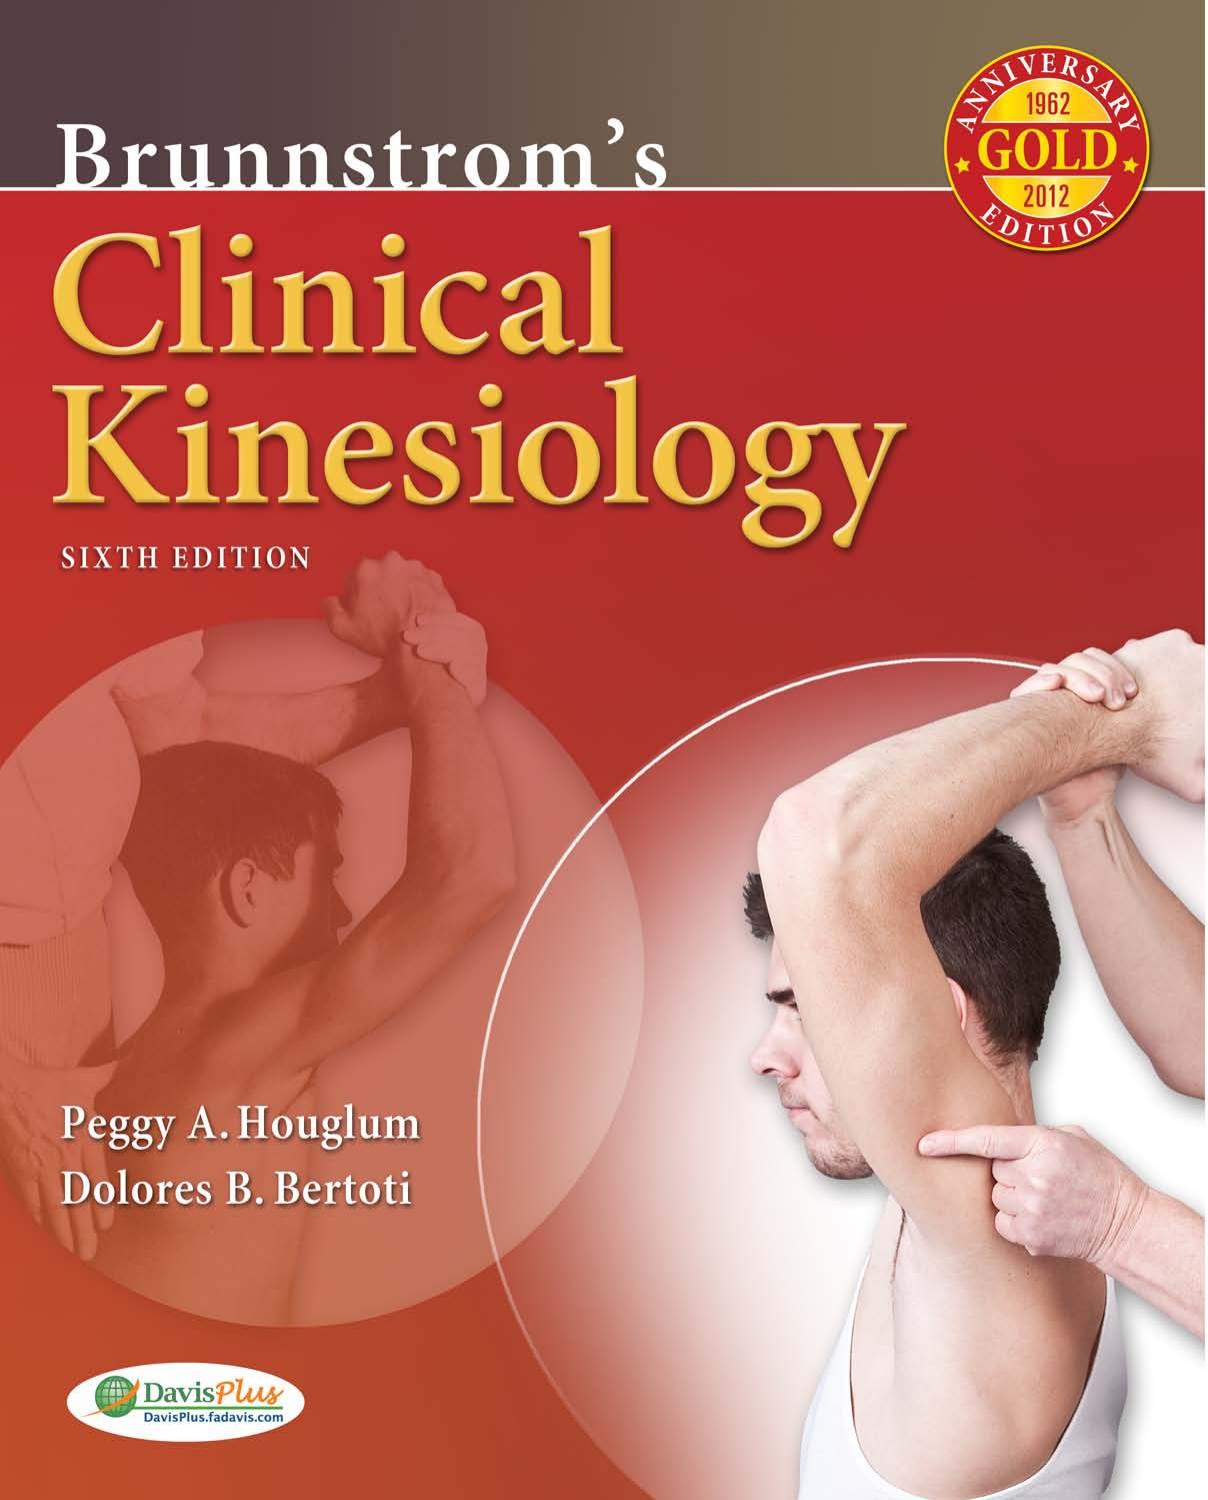 Brunnstrom s Clinical Kinesiology, 6th Edition